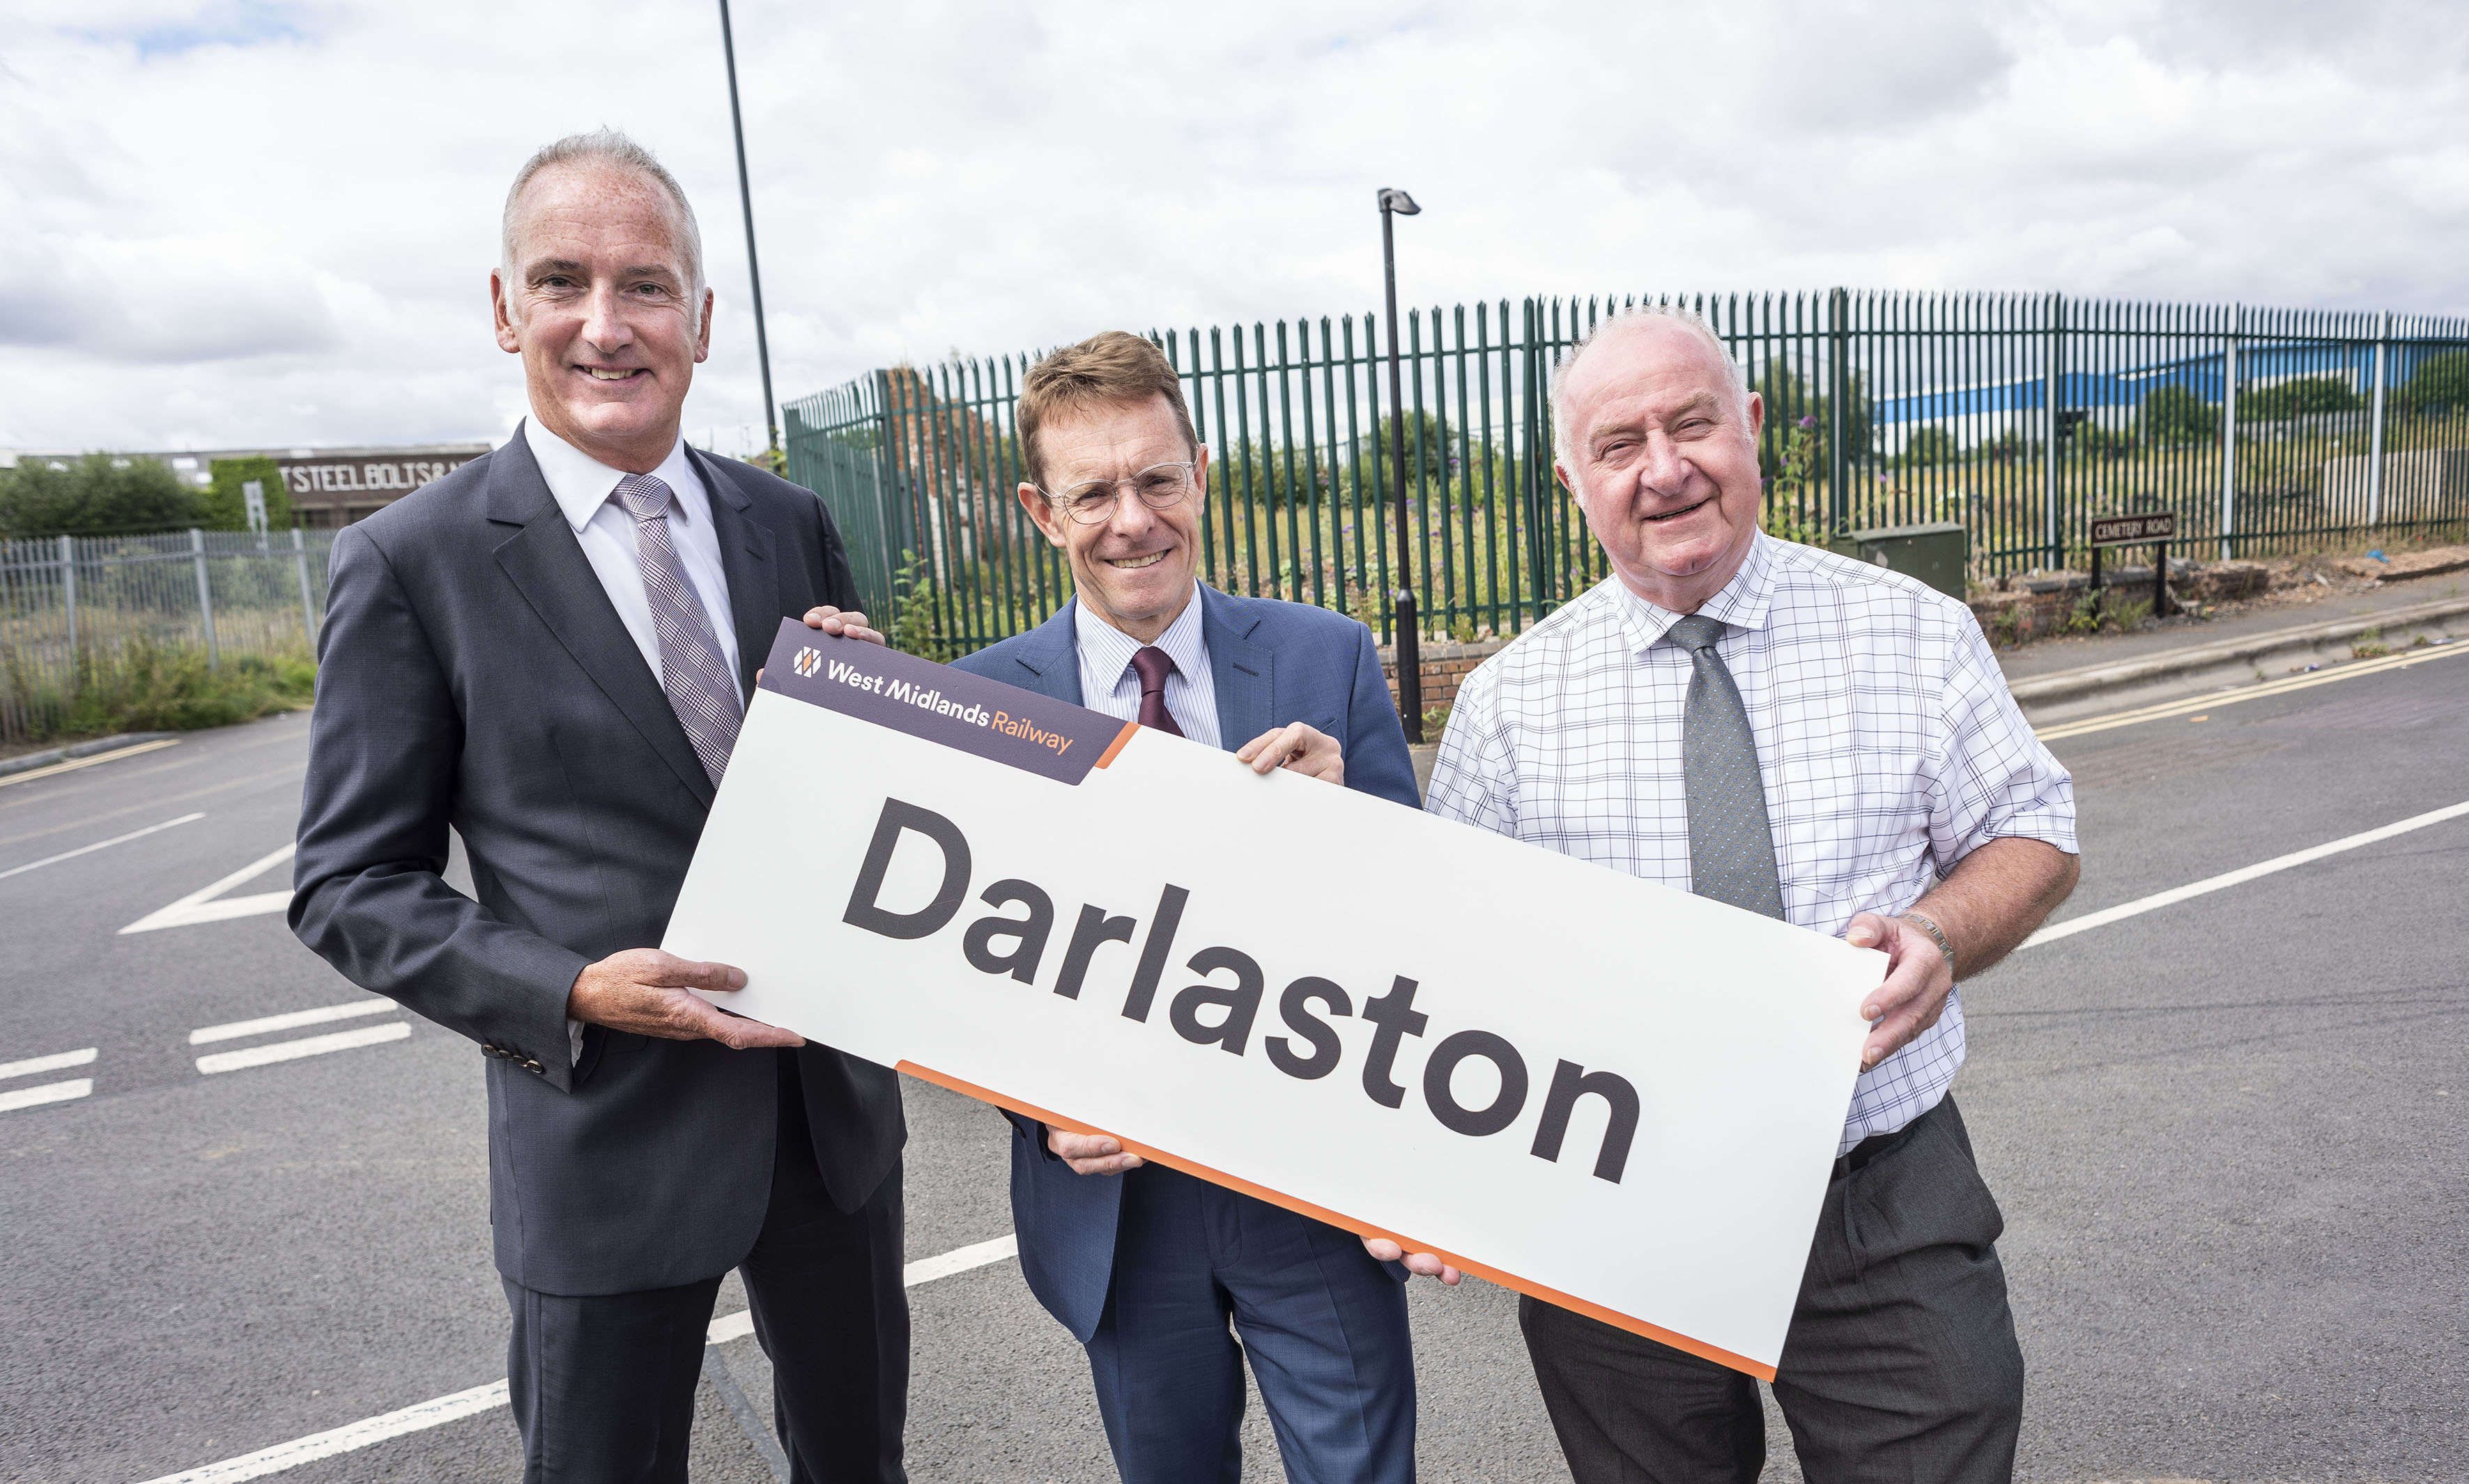 (l-r): Gareth Williams, development director of St Francis Group, Mayor of the West Midlands Andy Street and Cllr Mike Bird, leader of Walsall Council announce a land deal paving the way for a new train station at Darlaston